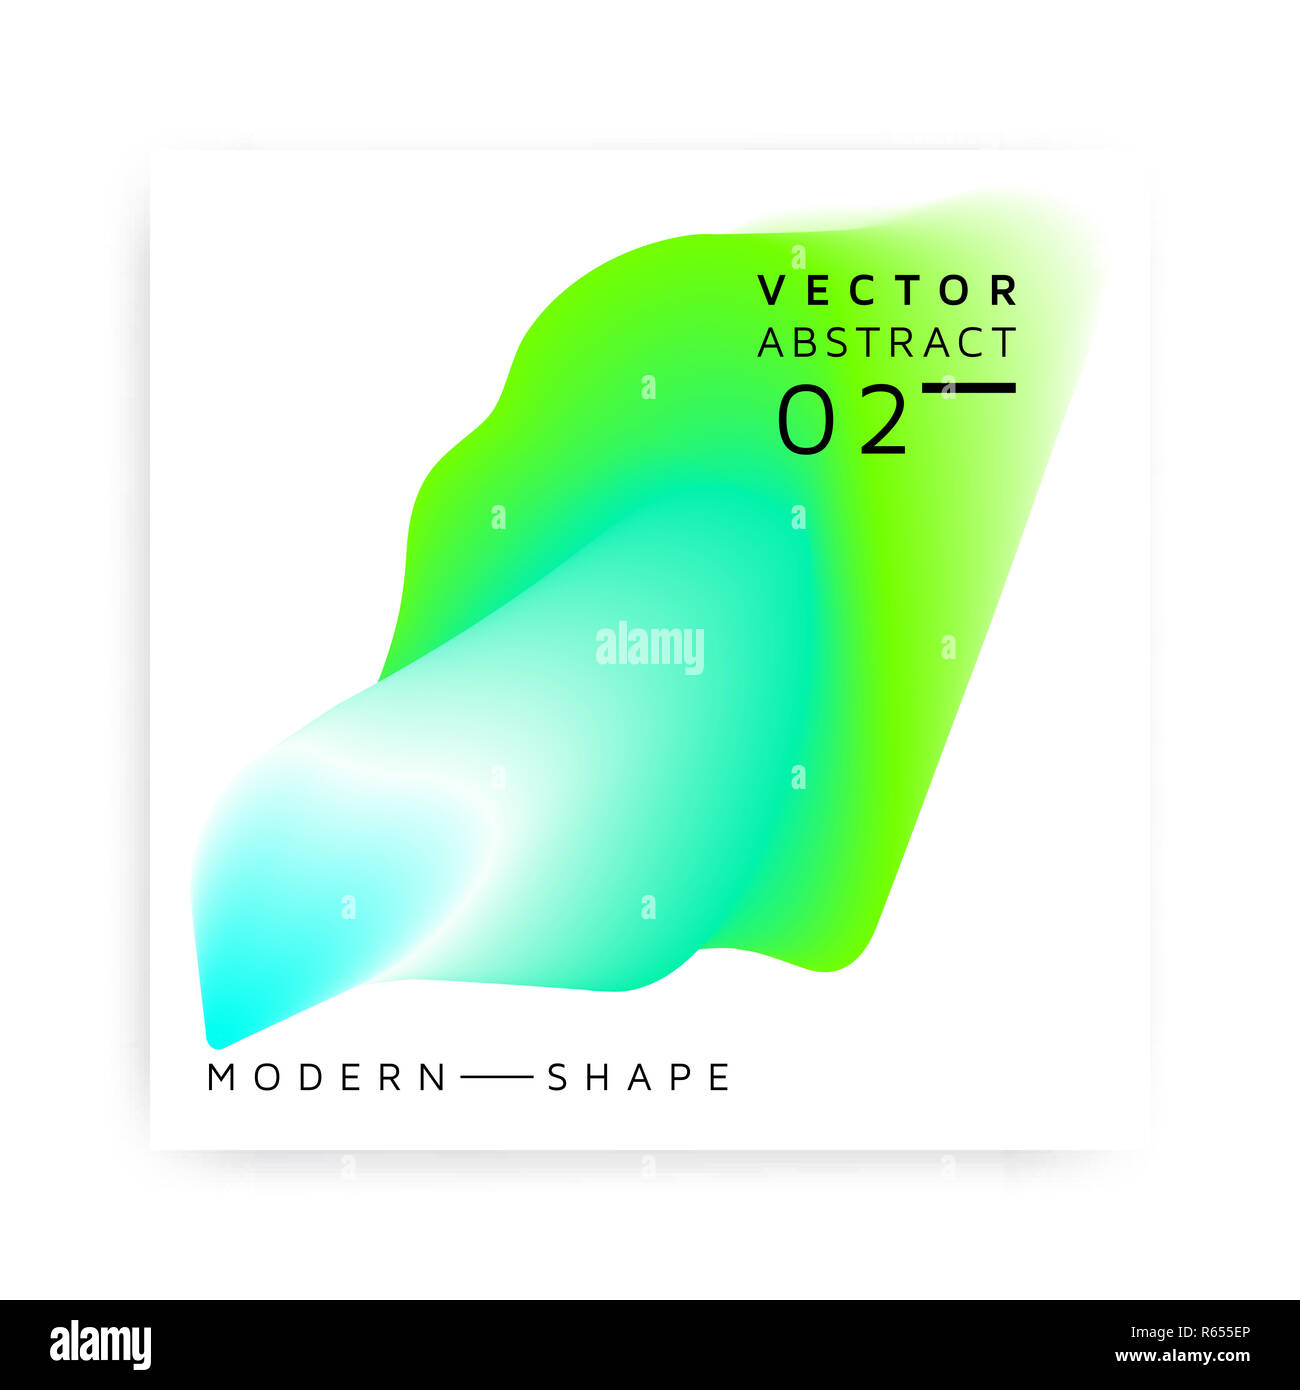 Abstract vector modern shape colorful Stock Photo